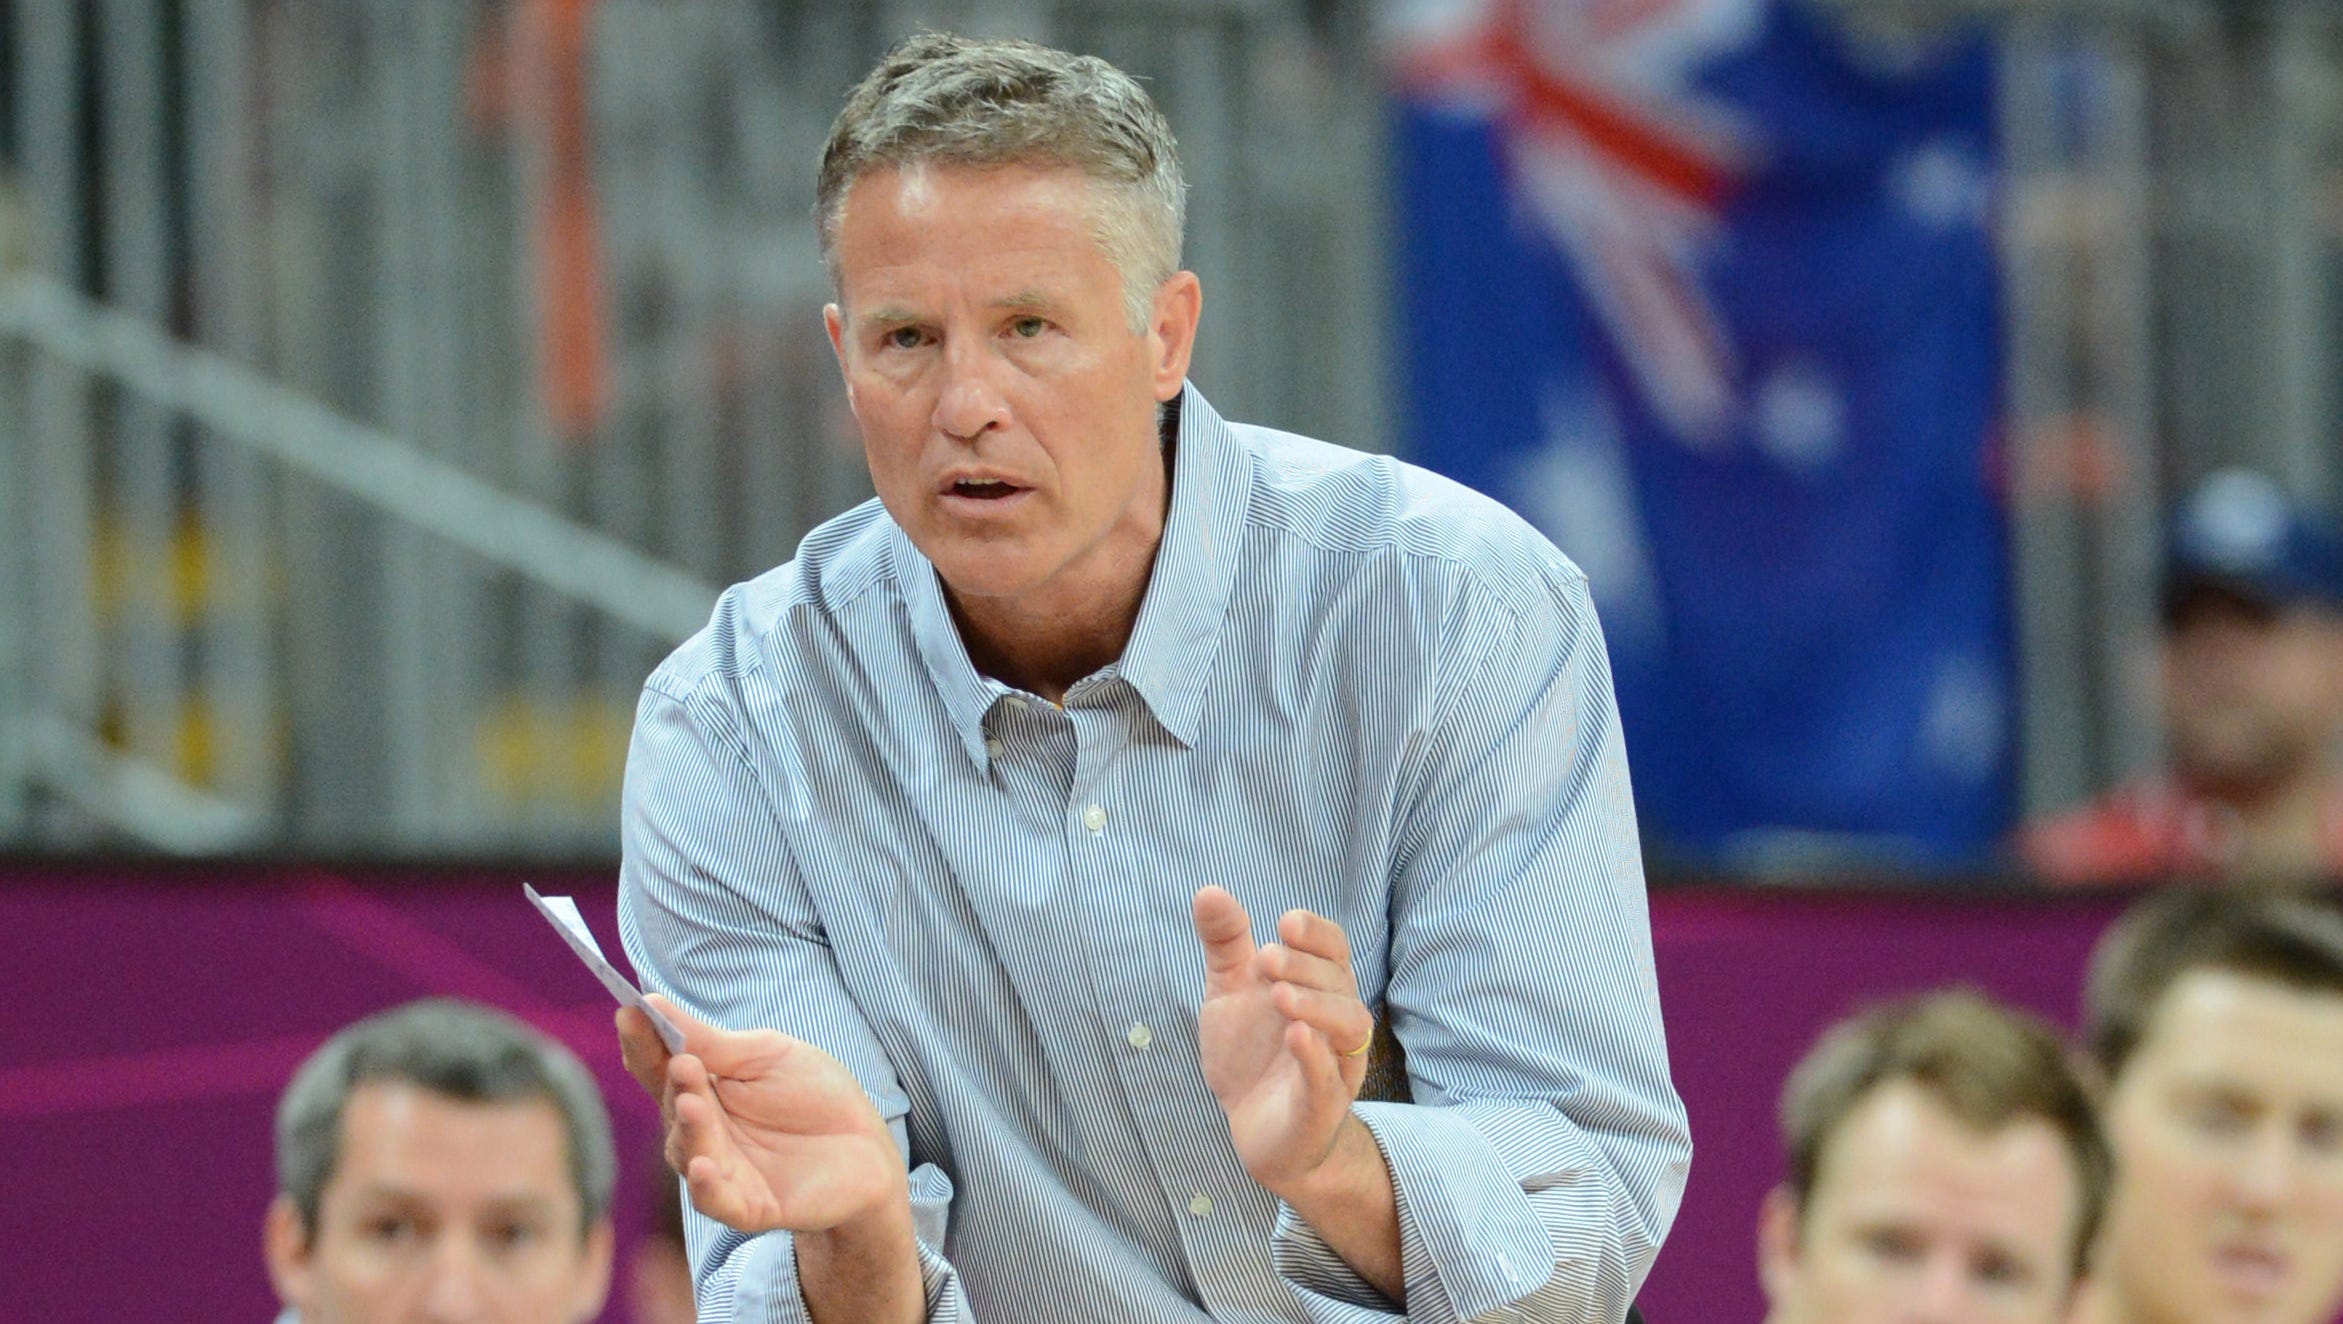 Brett Brown demanded 4-year contract to coach 76ers